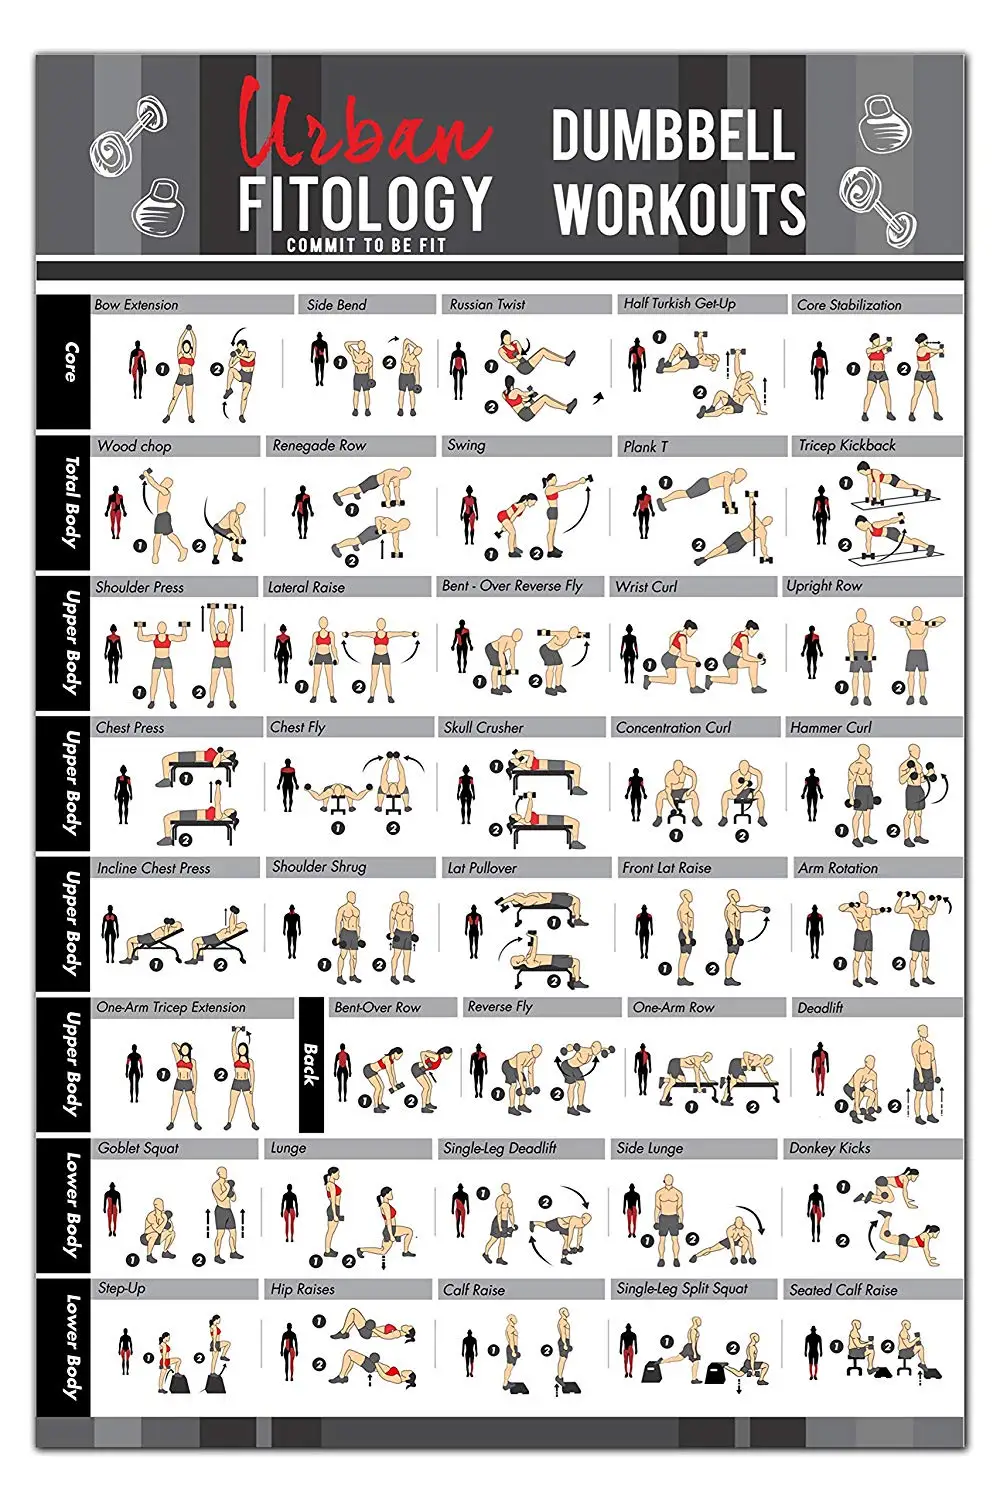 6 Day Weekly Workout Plan At Home With Dumbbells with Comfort Workout Clothes